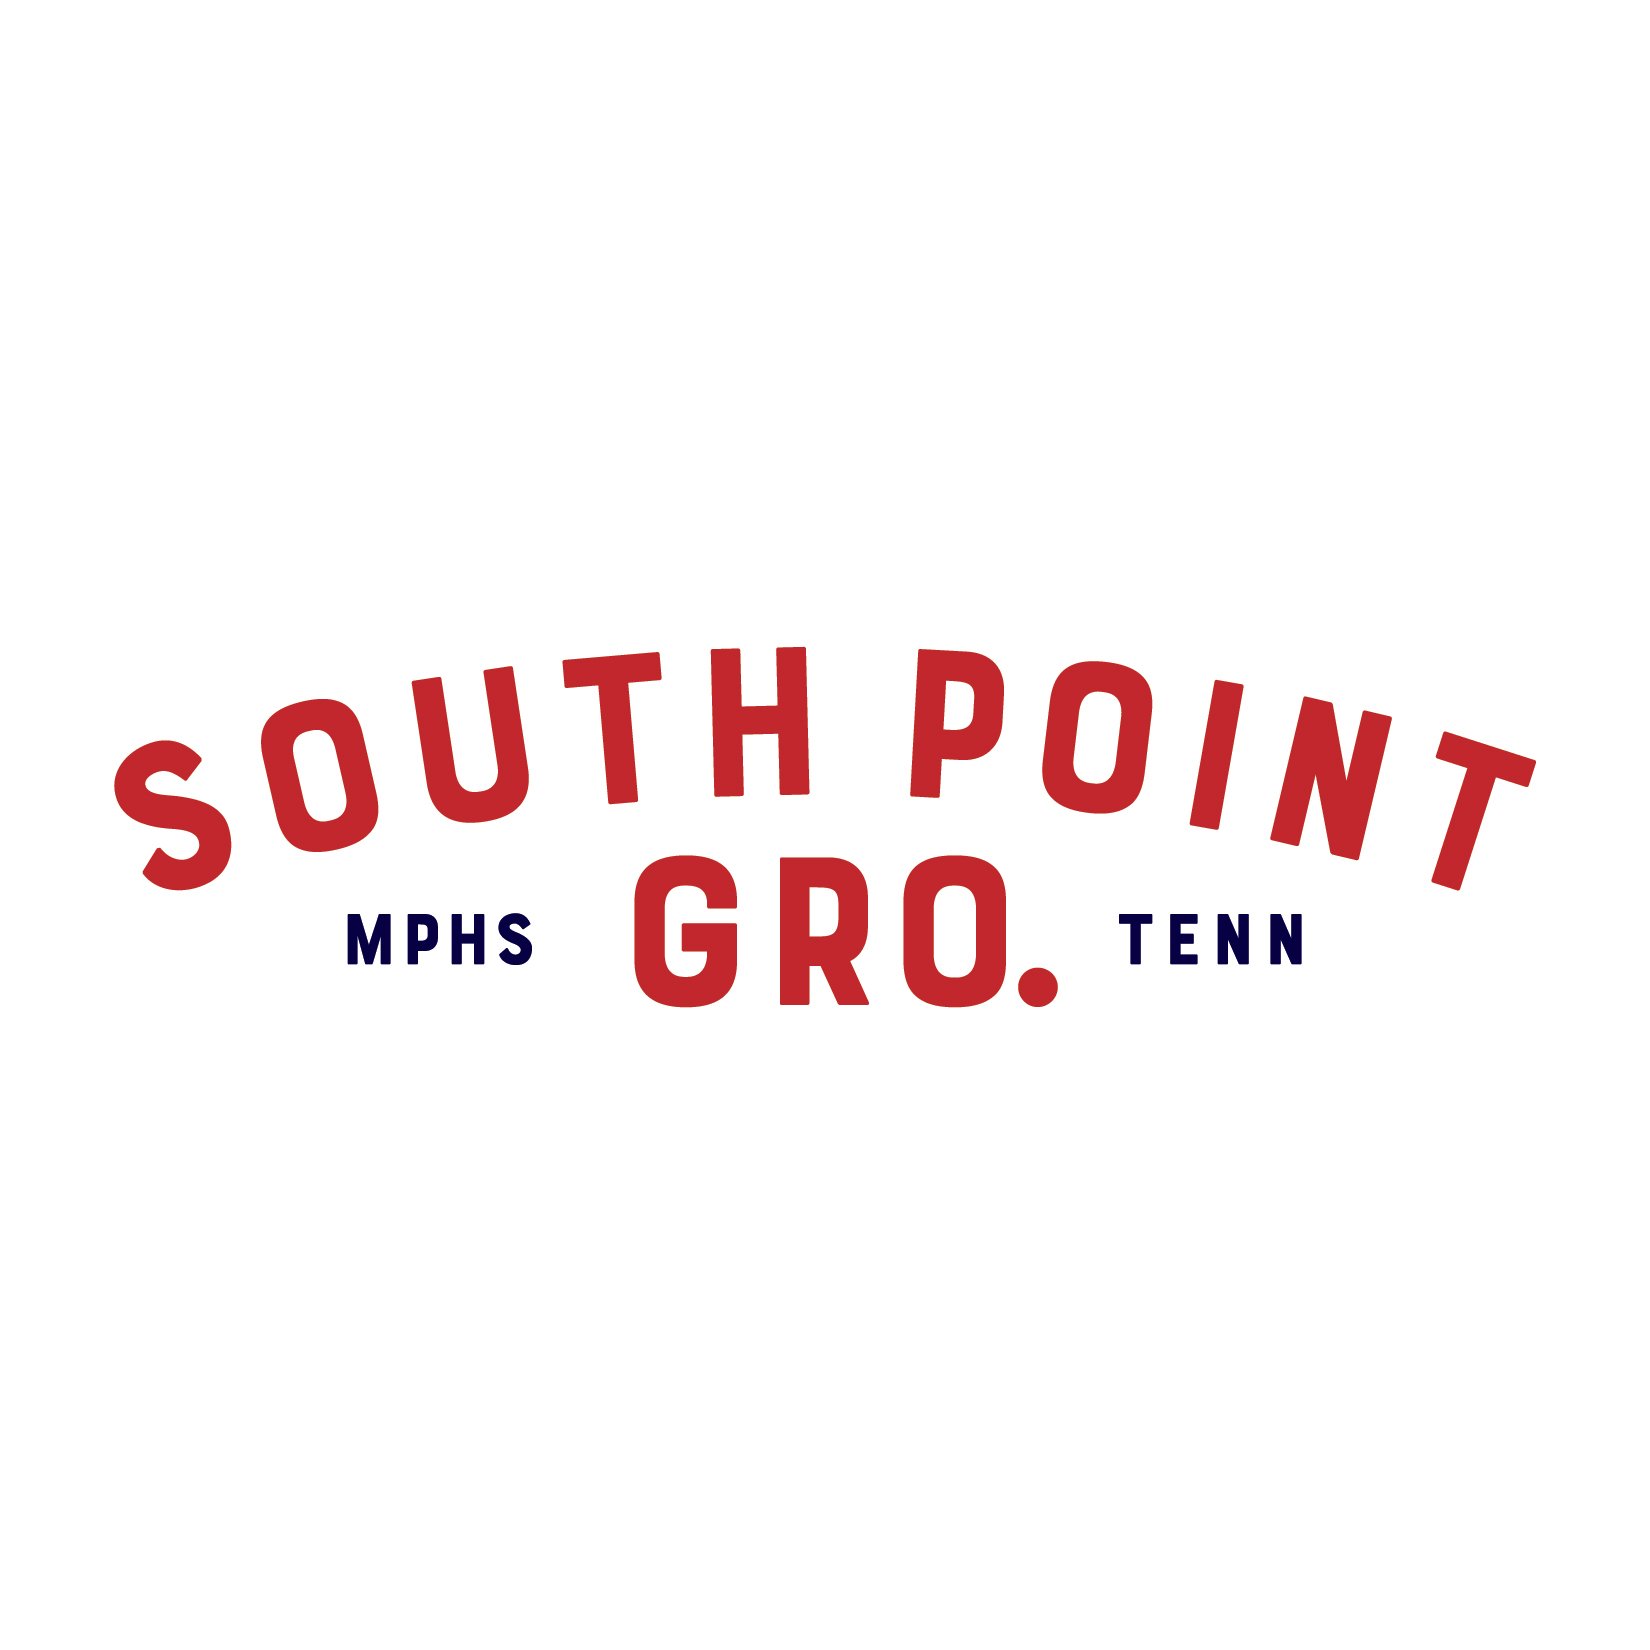  South Point Grocery  Downtown Memphis  South Point Grocery logo graphic  Branding creative and design by Chuck Mitchell 